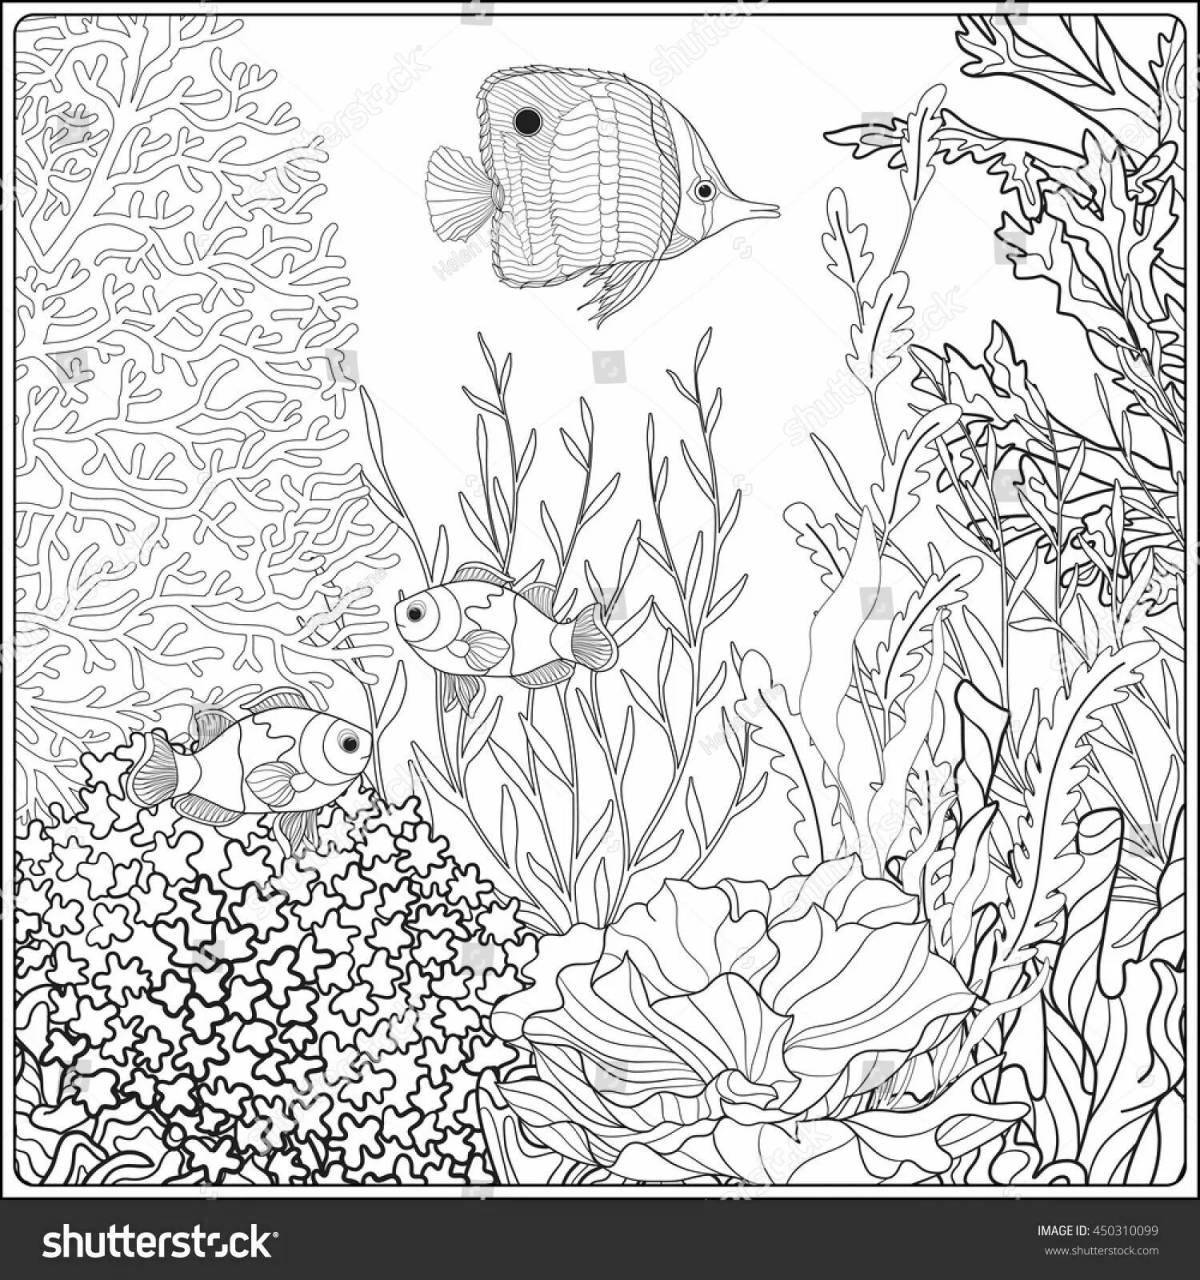 Colorful coral reef coloring book